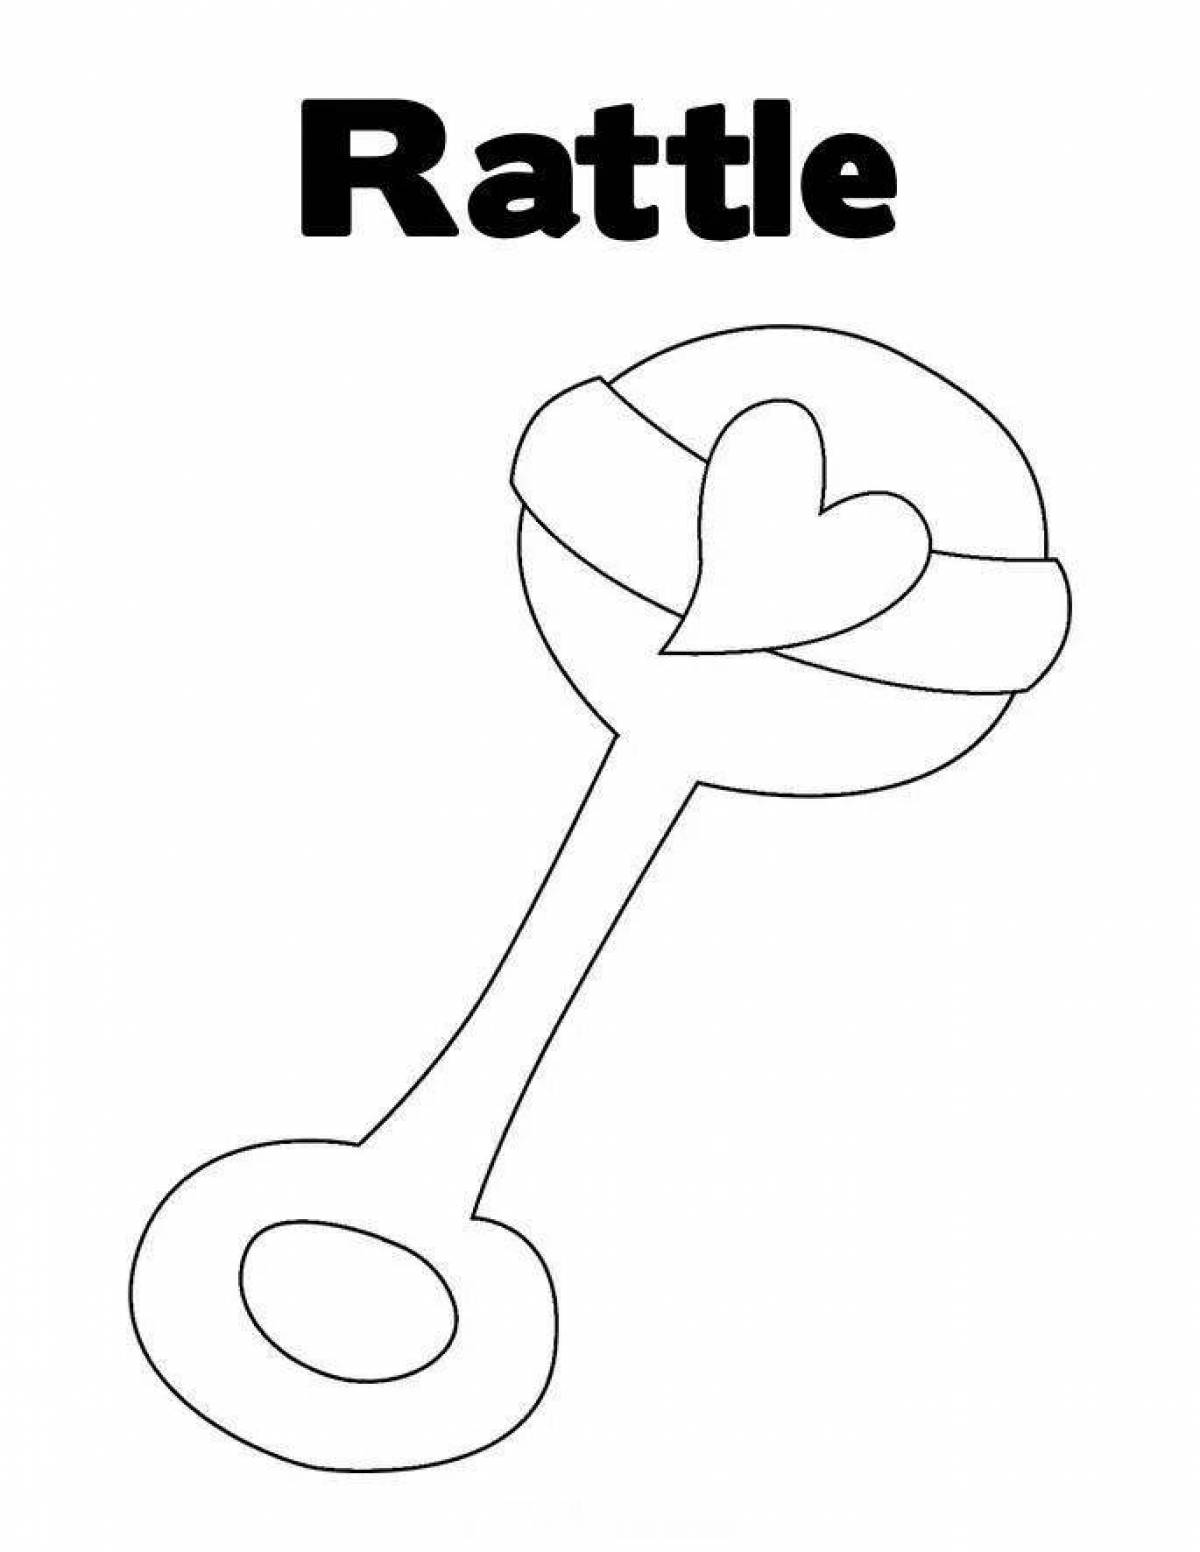 Adorable rattle coloring page